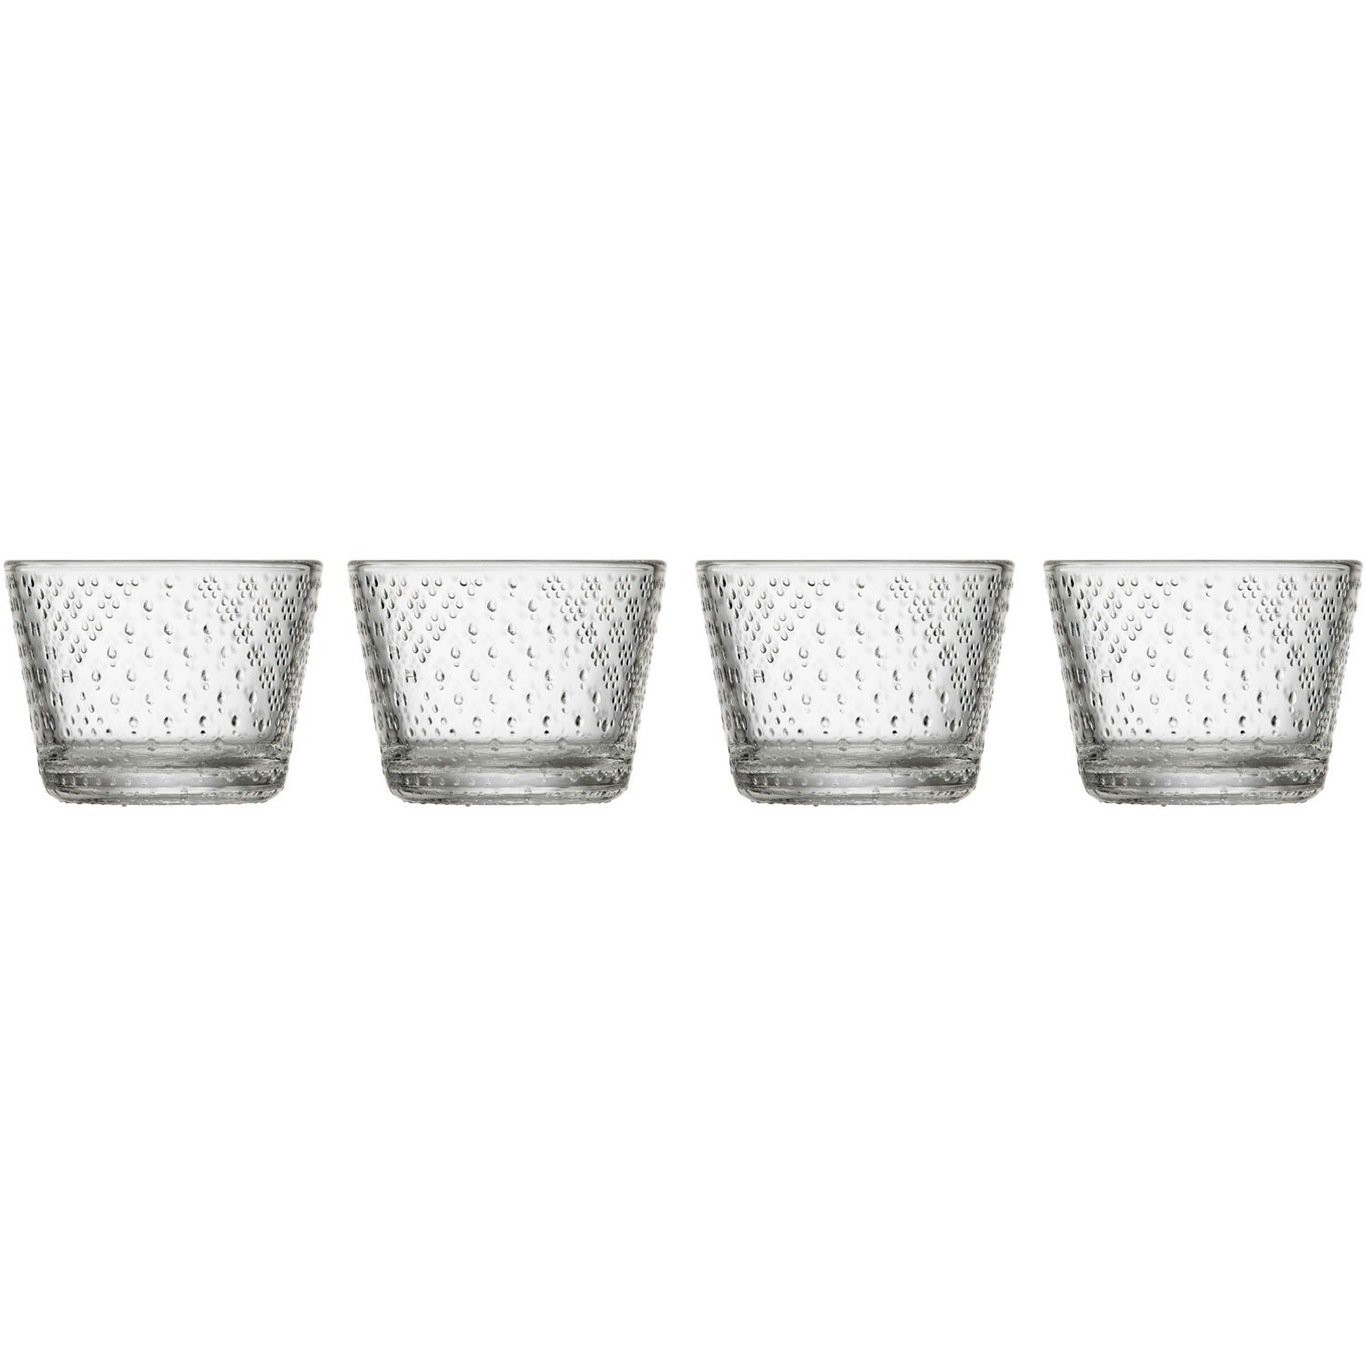 Tundra Glass 4-pack 16 cl, Clear